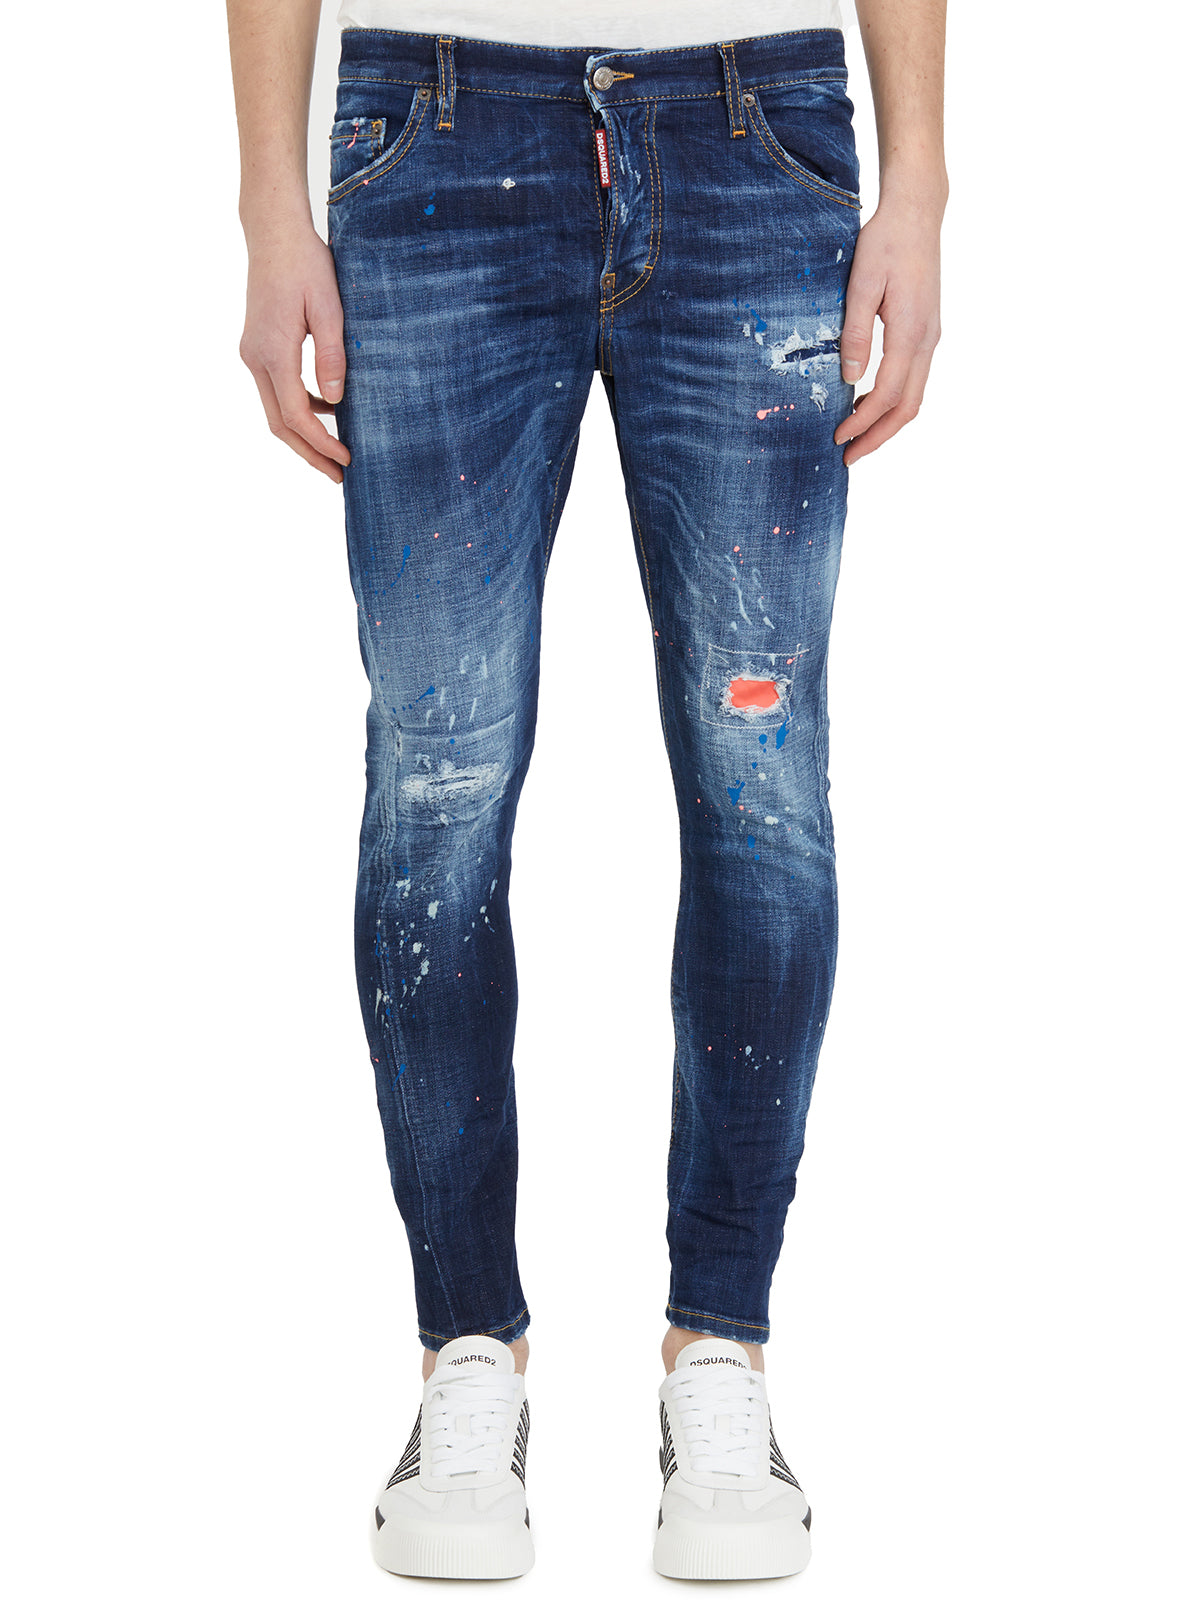 DSQUARED2 Blue Denim Stretch Jeans for Men with 5 Pockets and Waist Loops